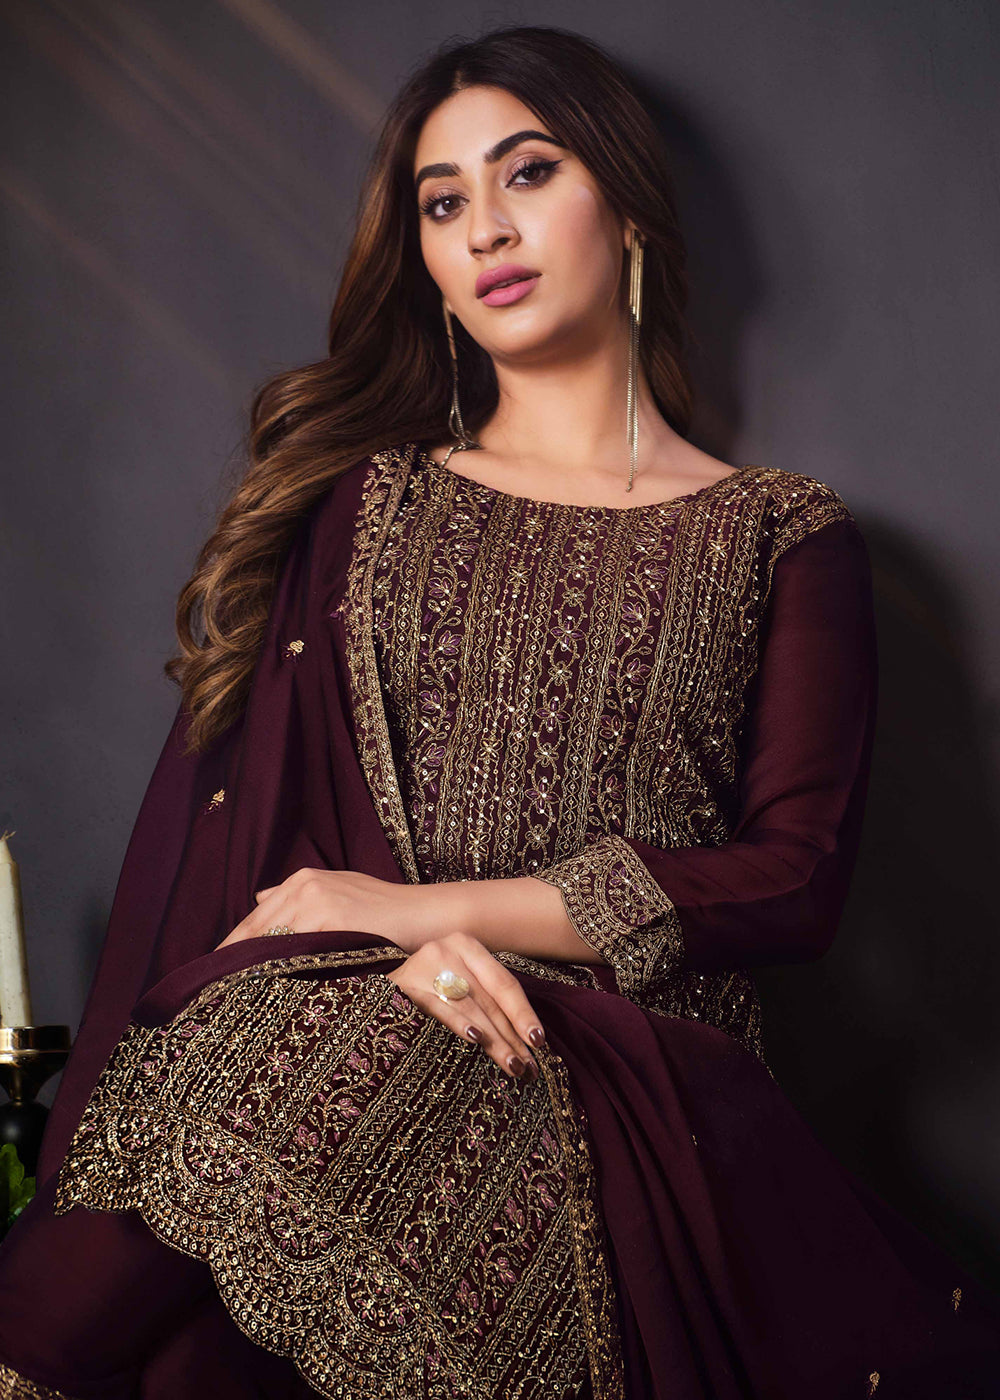 Buy Now Two Tone Cottonic Georgette Dark Plum Function Style Salwar Suit Online in USA, UK, Canada, Germany, Australia & Worldwide at Empress Clothing.